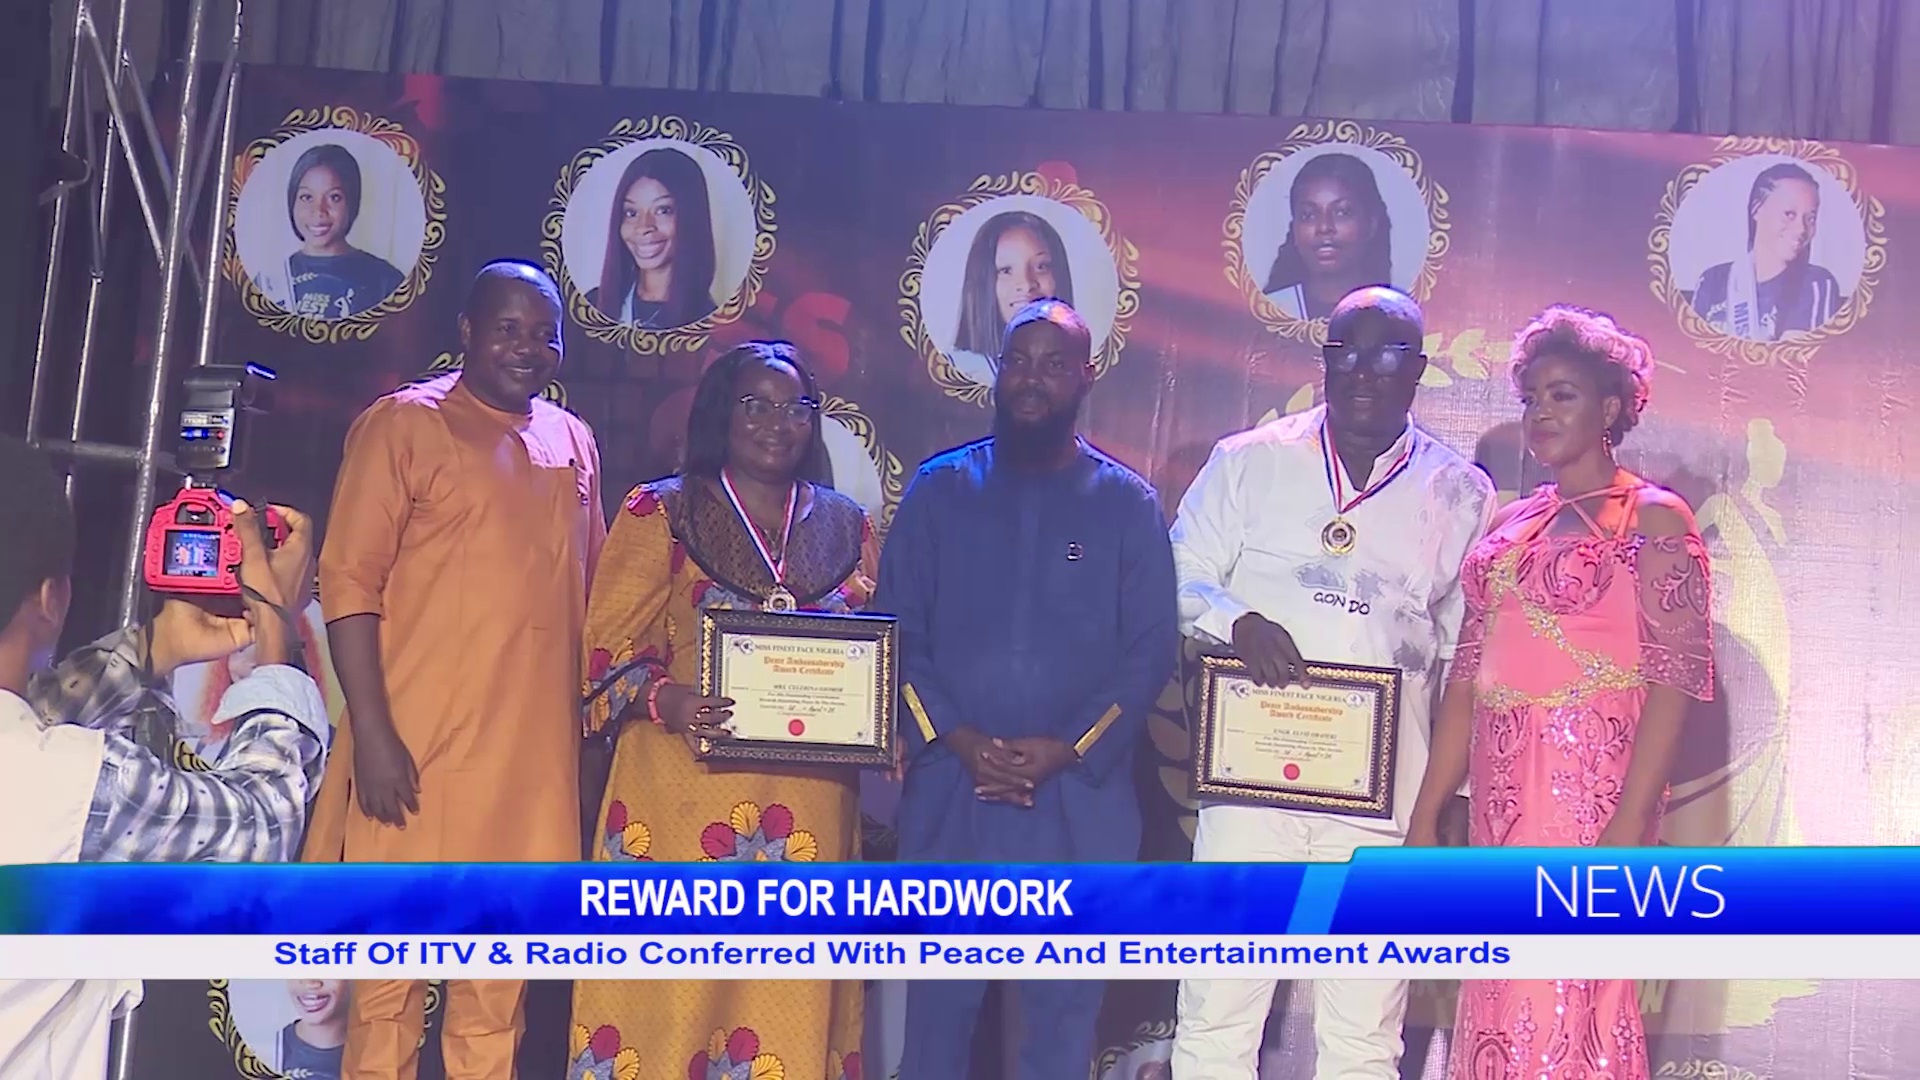 Staff Of ITV & Radio Conferred With Peace And Entertainment Awards